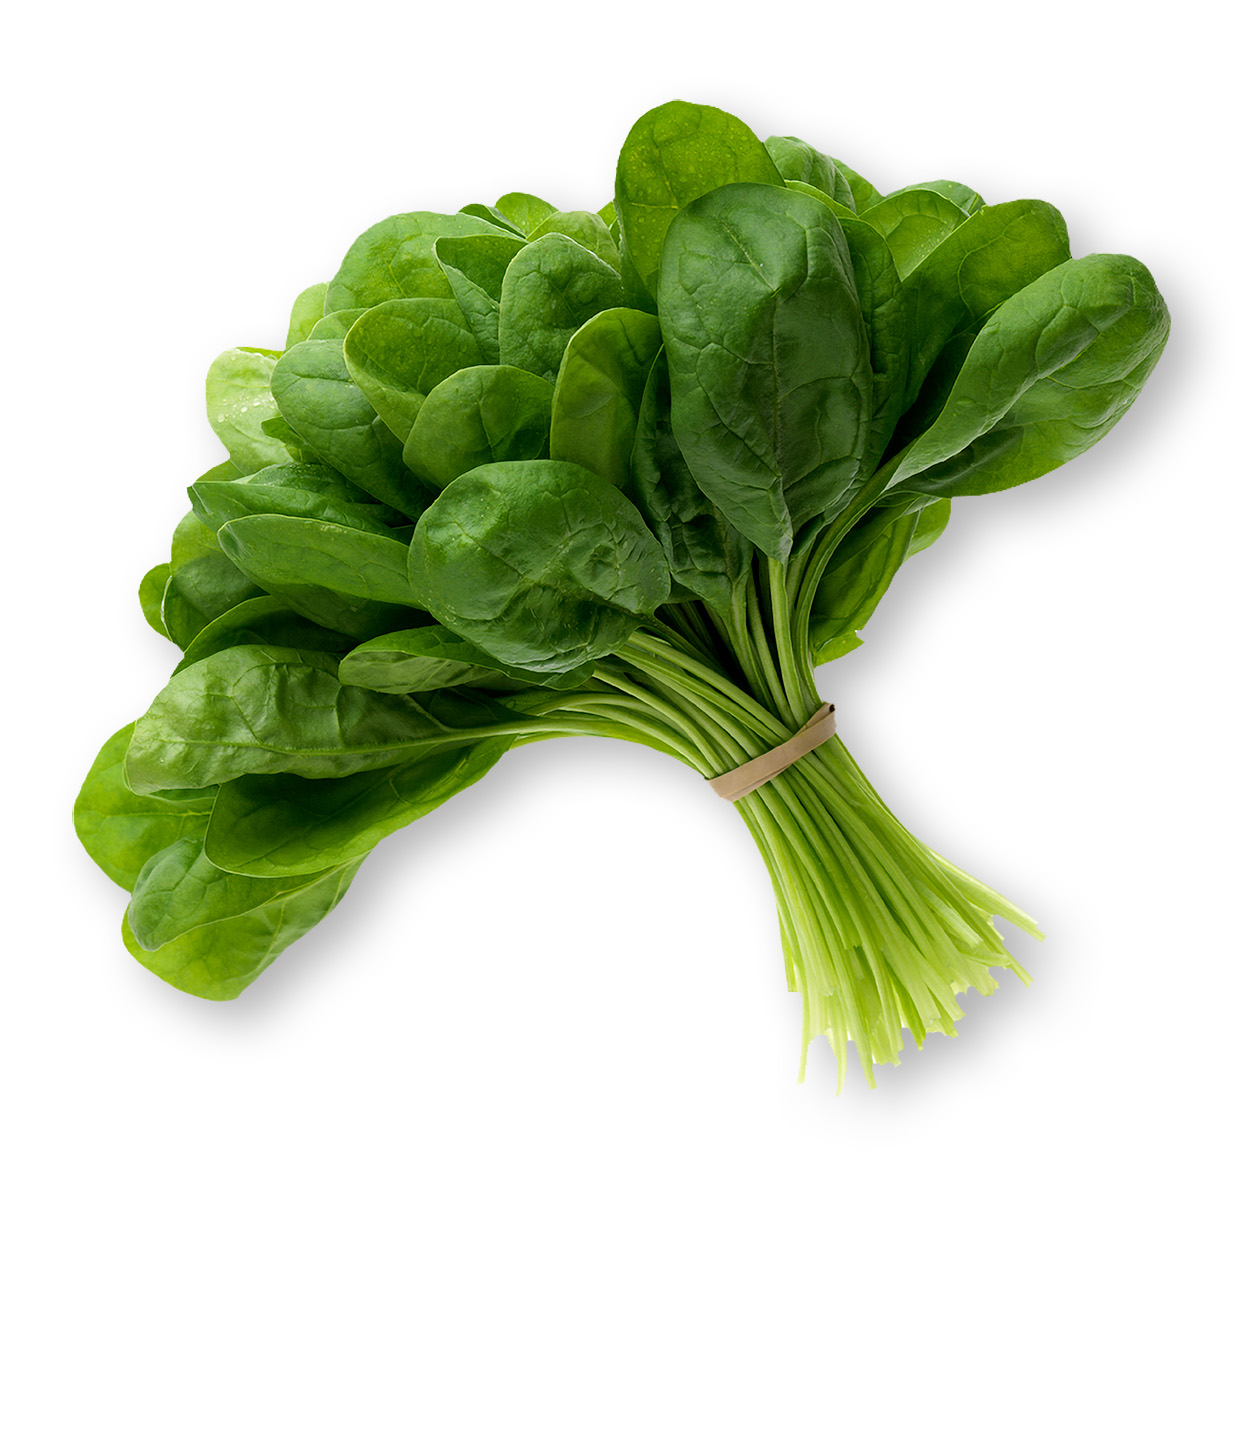 Spinach picture